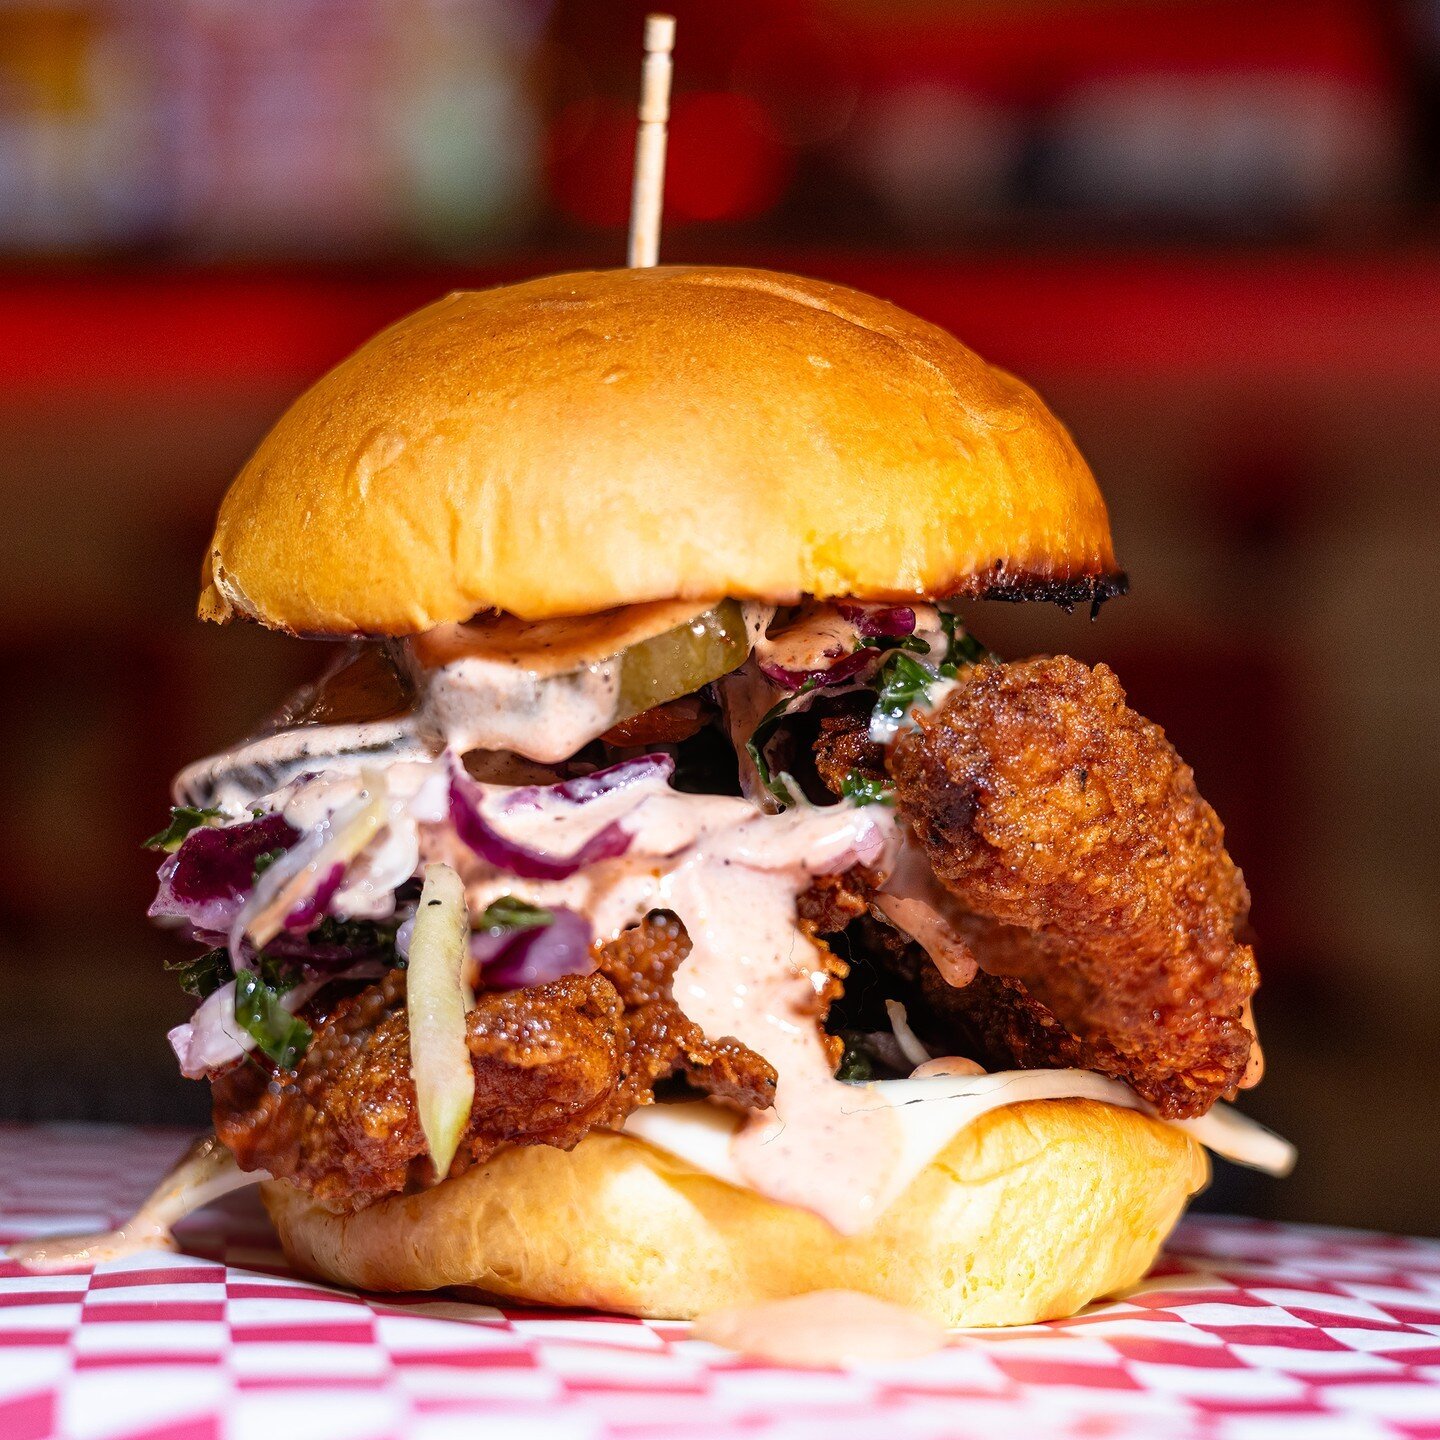 Indulge the @kukri.chicken  Chicken Sandwich 🐓 featuring crispy hand-breaded chicken tenders, fresh slaw, tangy pickles, and our zesty 🔥SPICY🔥 Kukri Sauce, all nestled in a soft brioche bun. 

Savor it with a side of fries or choose your preferred